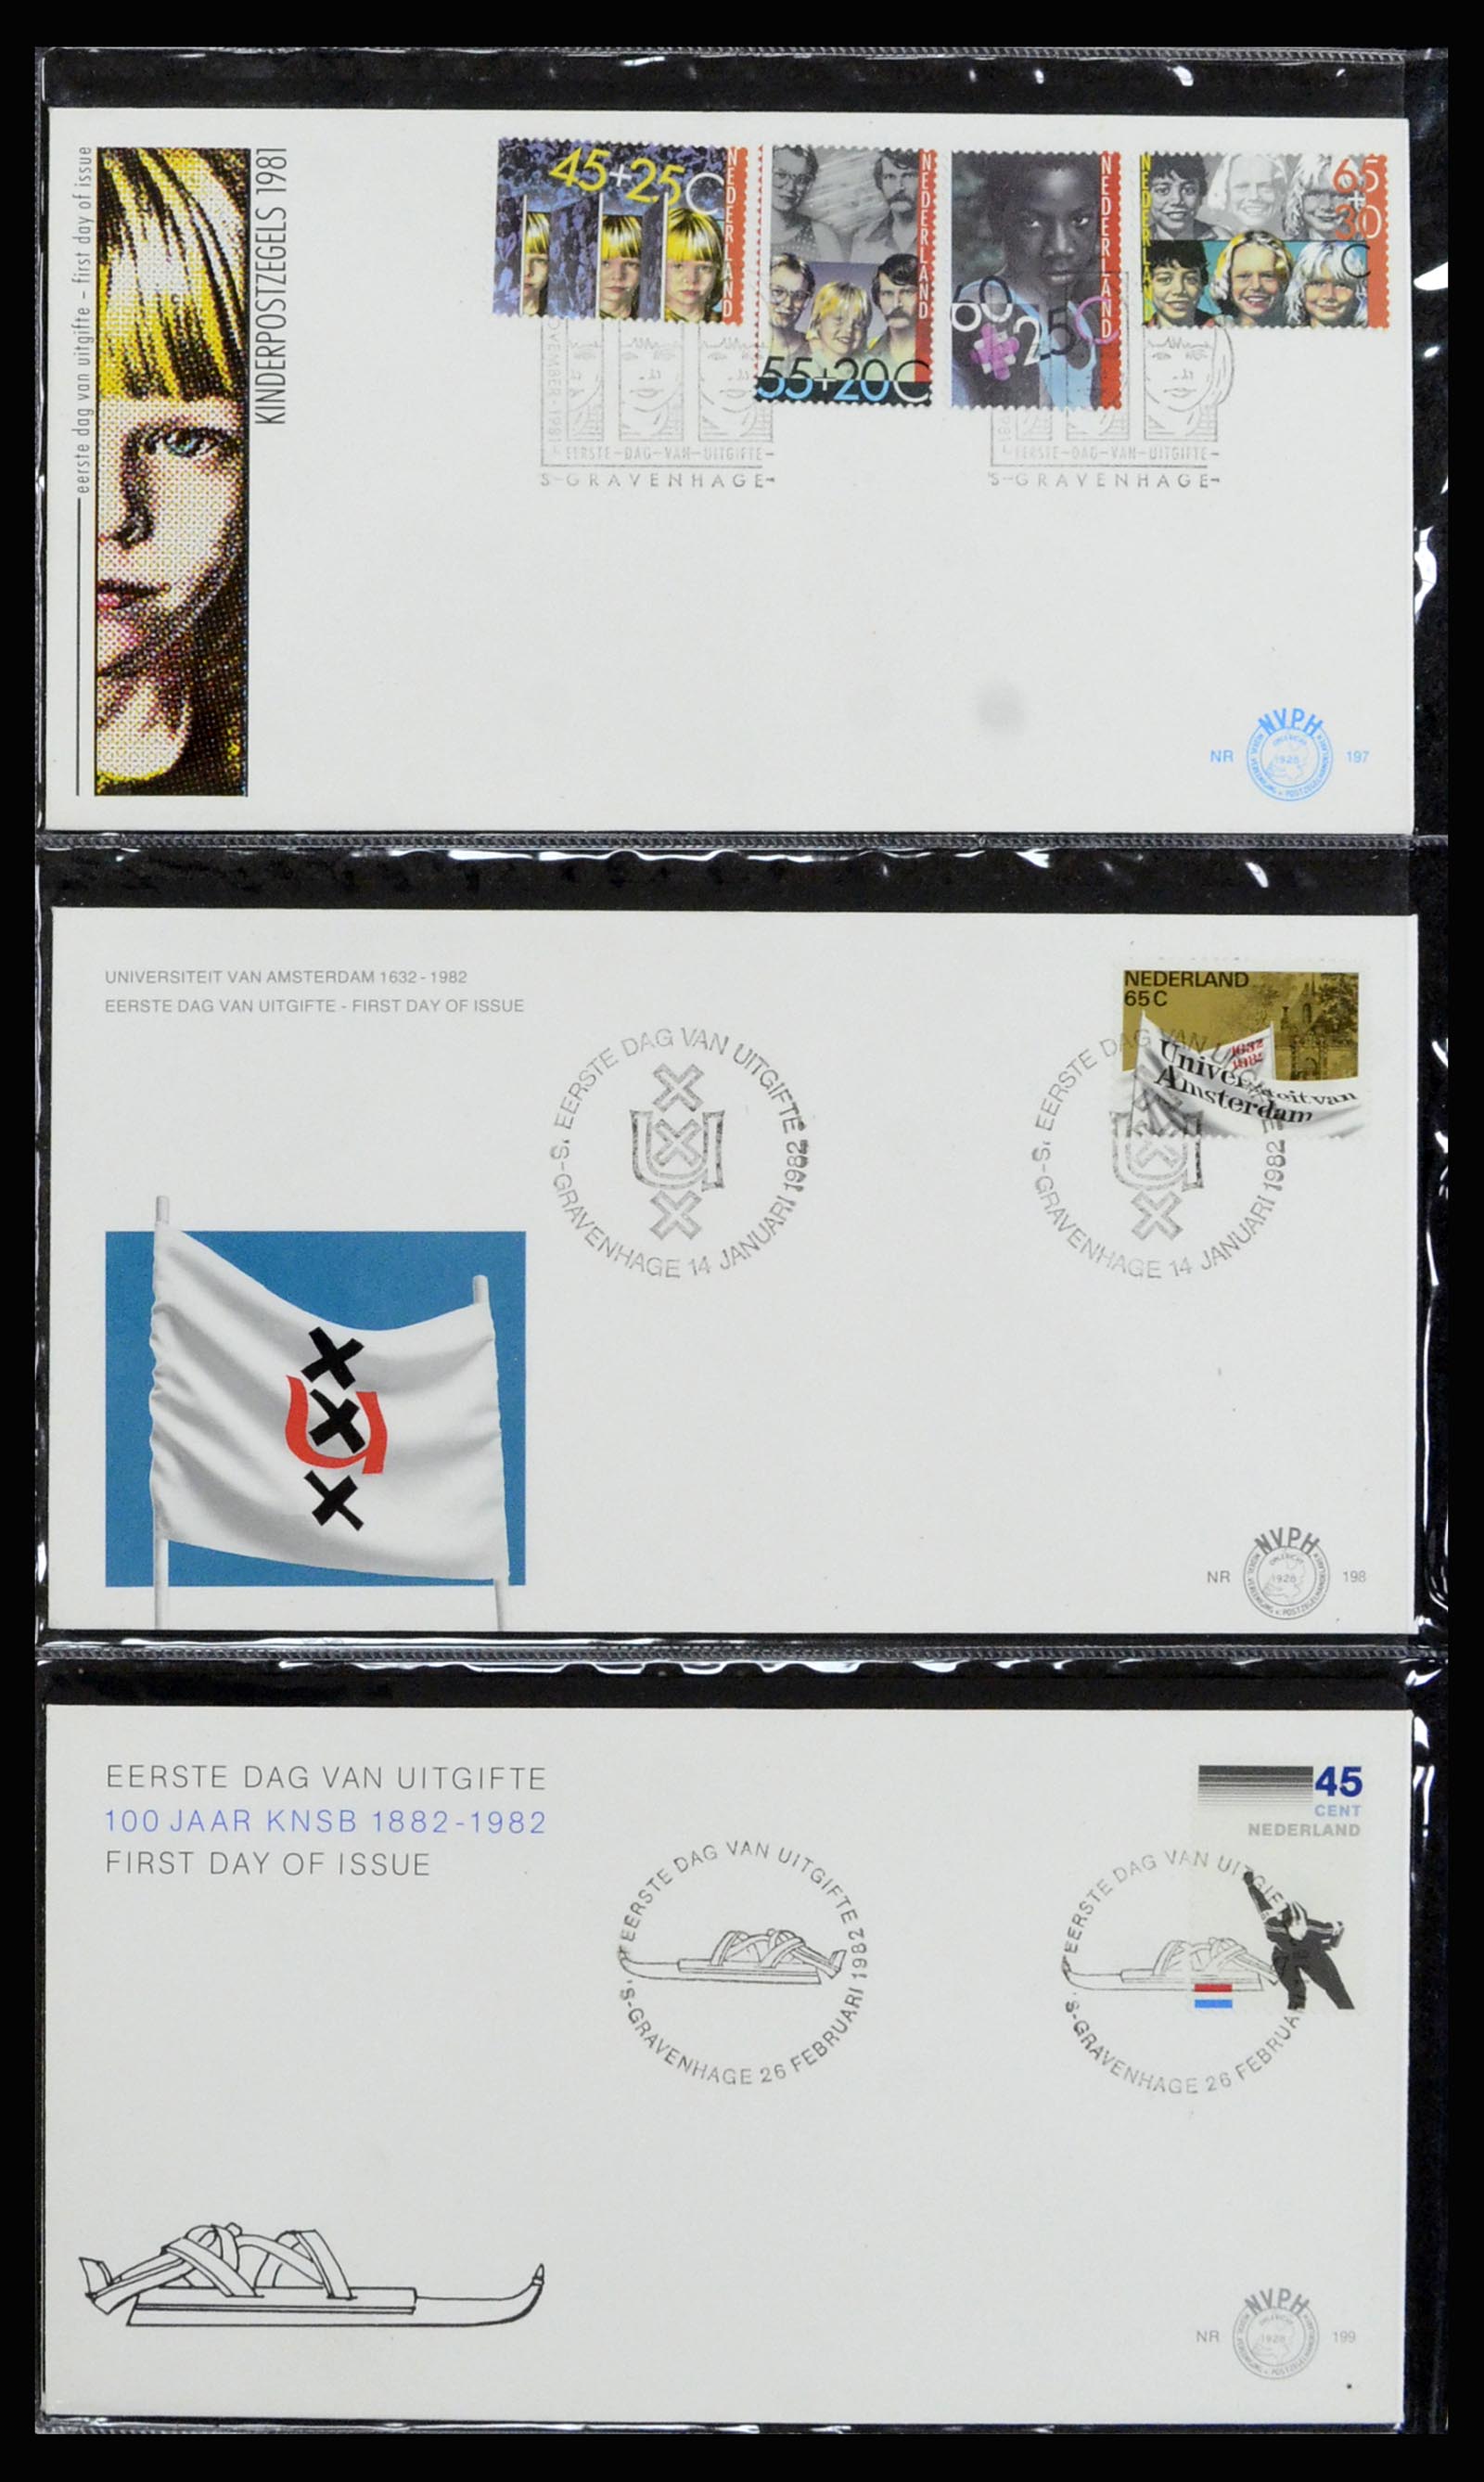 37197 073 - Stamp collection 37197 Netherlands FDC's 1950-2004.